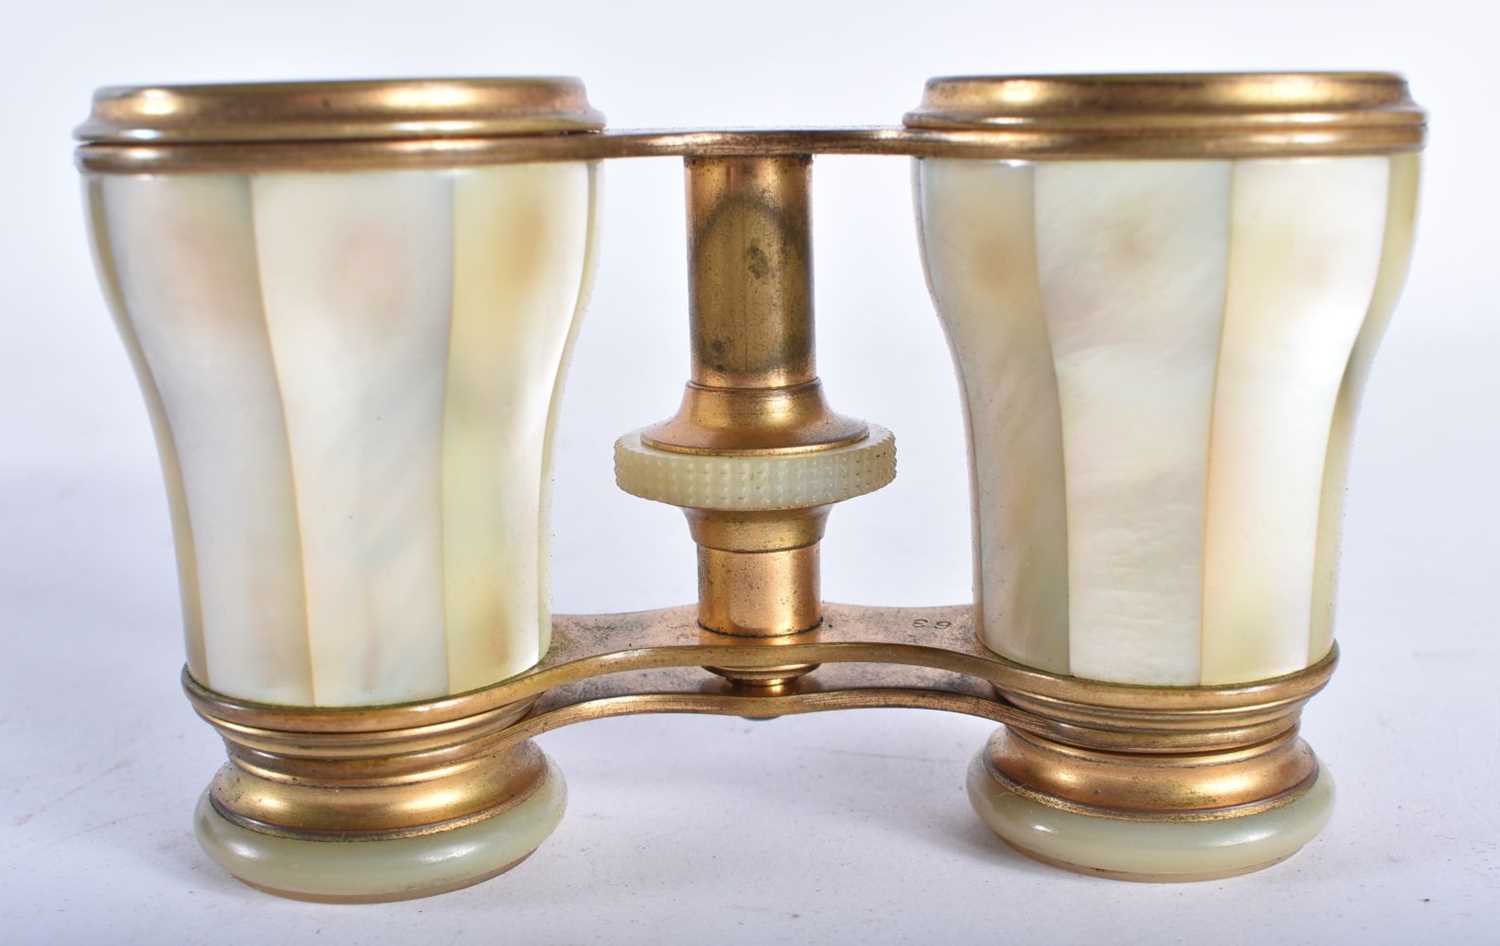 A PAIR OF MOTHER OF PEARL OPERA GLASSES. 8 cm x 9 cm extended. - Image 2 of 5